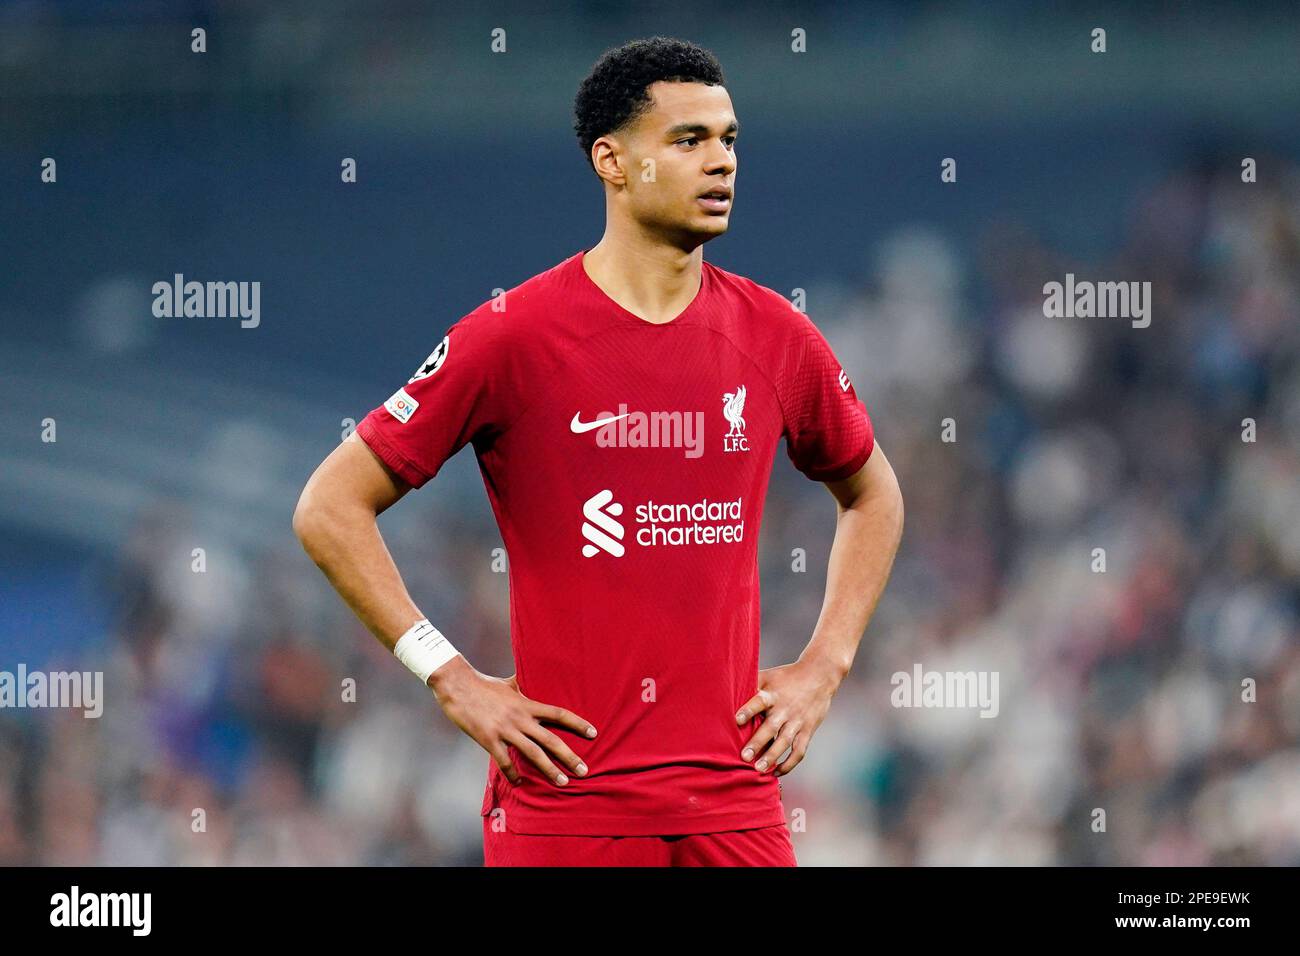 Madrid, Spain. 15th Mar, 2023. Cody Gakpo of Liverpool FC during the UEFA Champions League match, round of 16, 2nd leg between Real Madrid and Liverpool FC played at Santiago Bernabeu Stadium on March 15, 2023 in Madrid, Spain. (Photo by Colas Buera/PRESSIN) Credit: PRESSINPHOTO SPORTS AGENCY/Alamy Live News Stock Photo